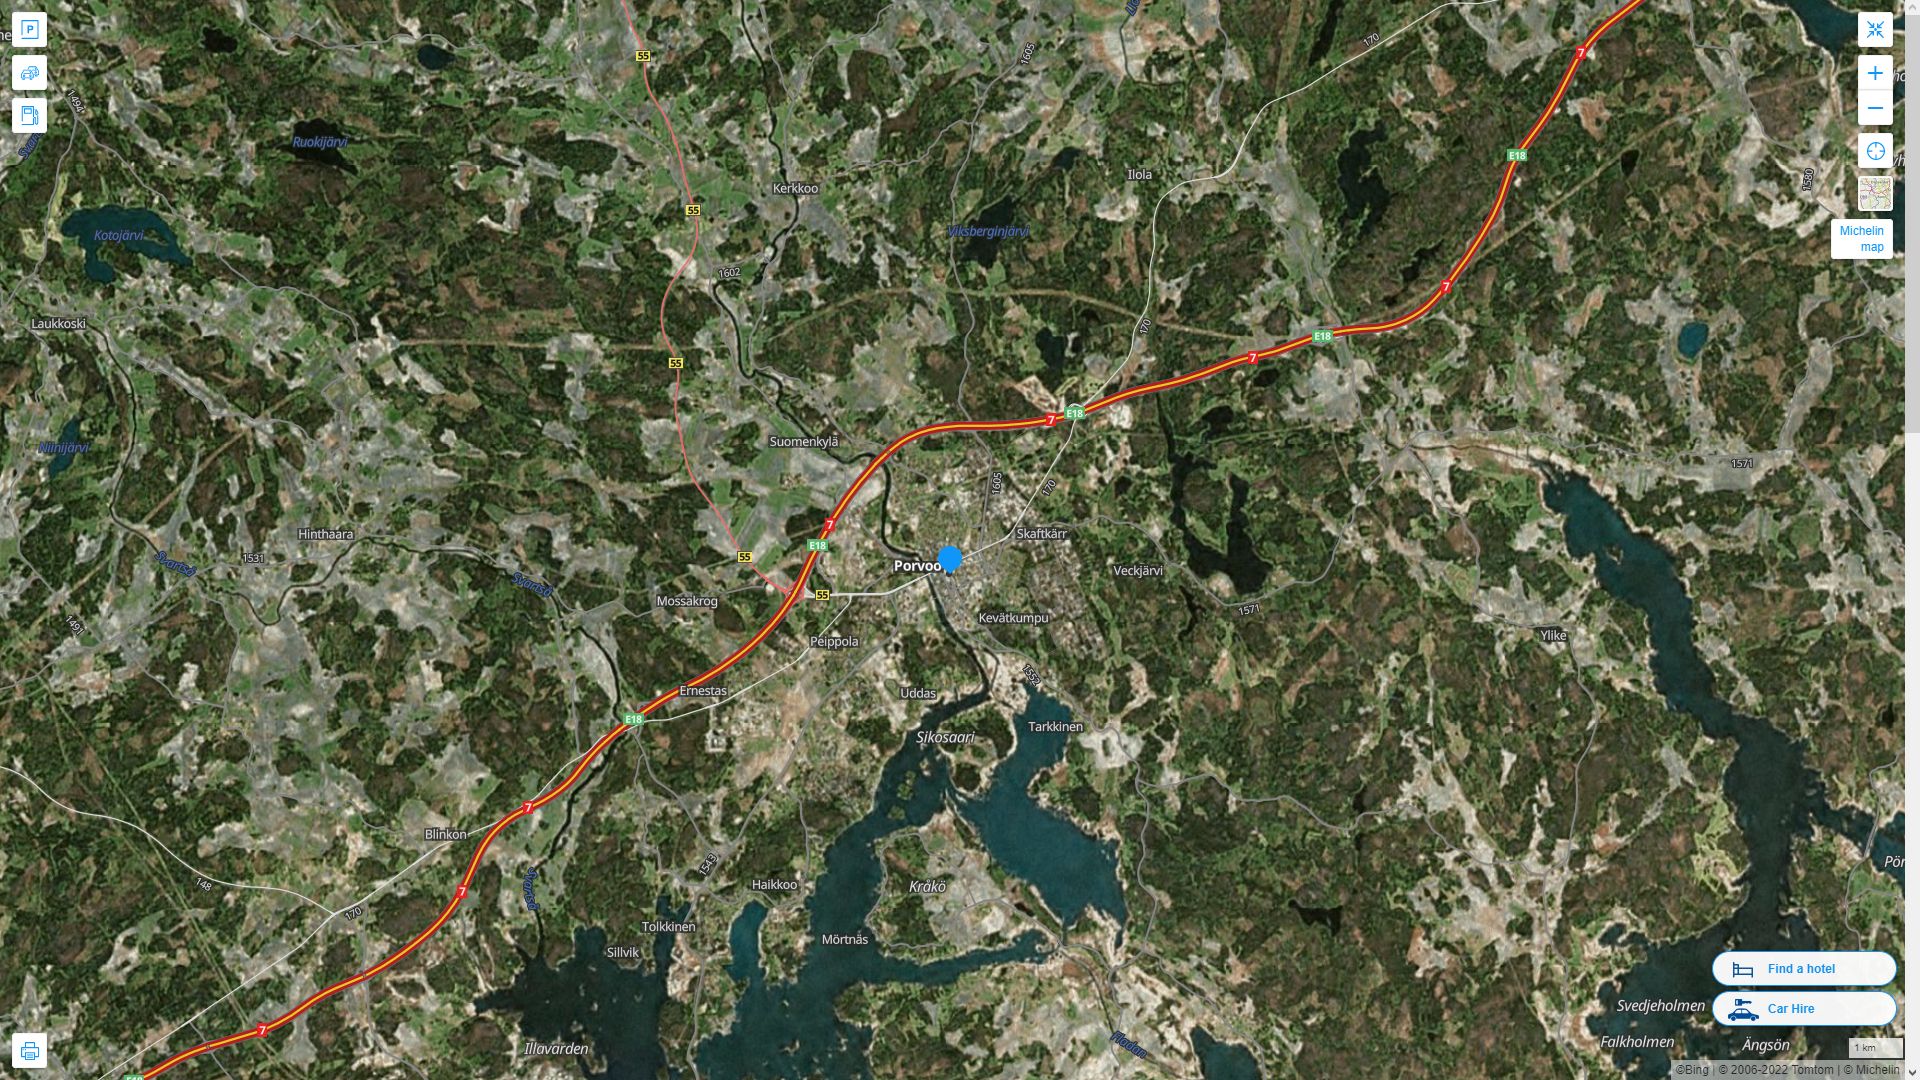 Porvoo Highway and Road Map with Satellite View